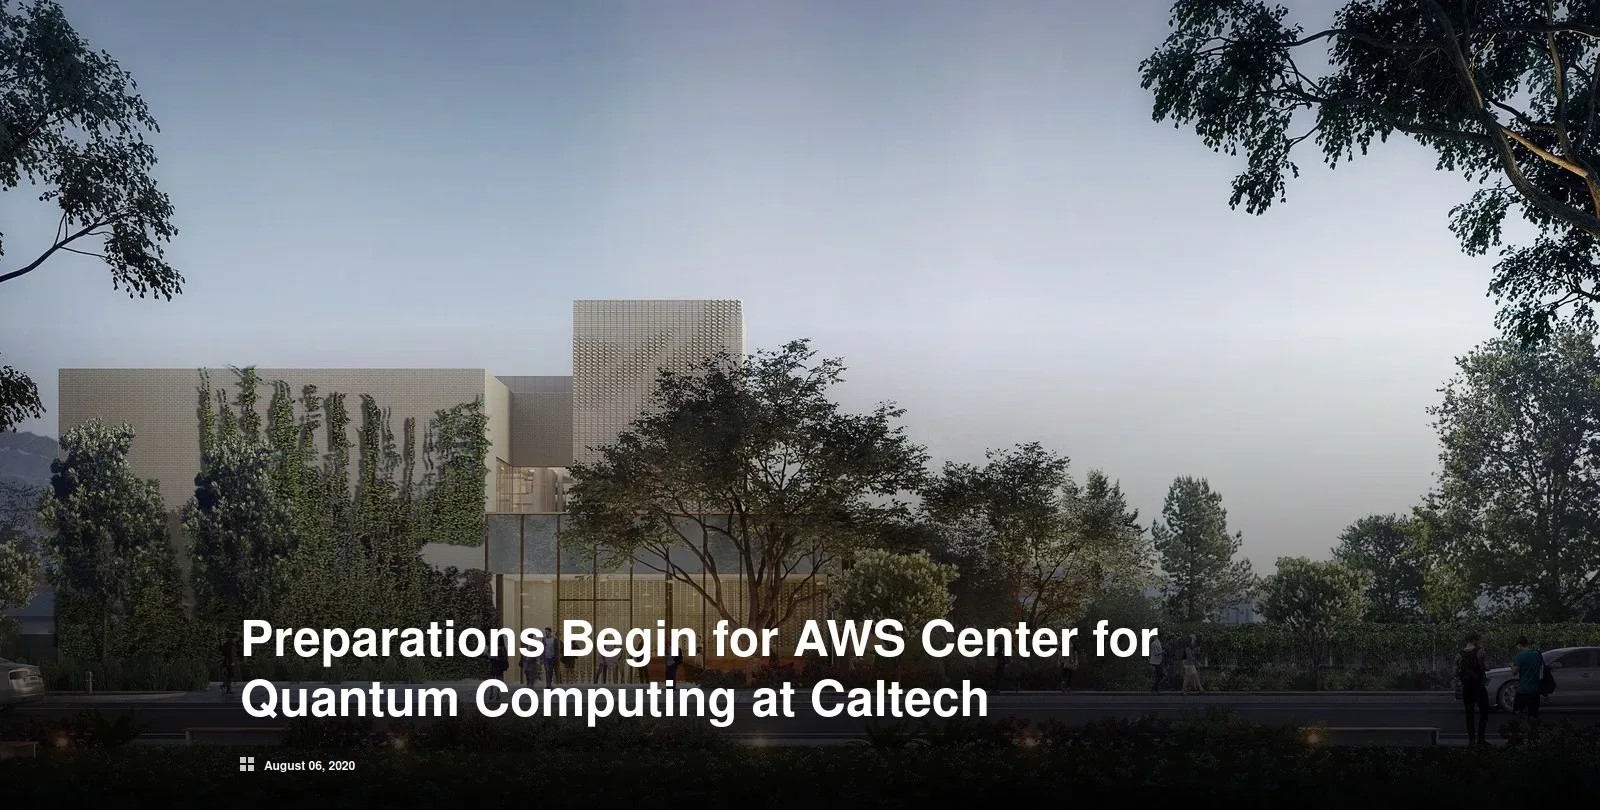 New Amazon Web Services Center For Quantum Computing At Caltech To Open In Spring 2021